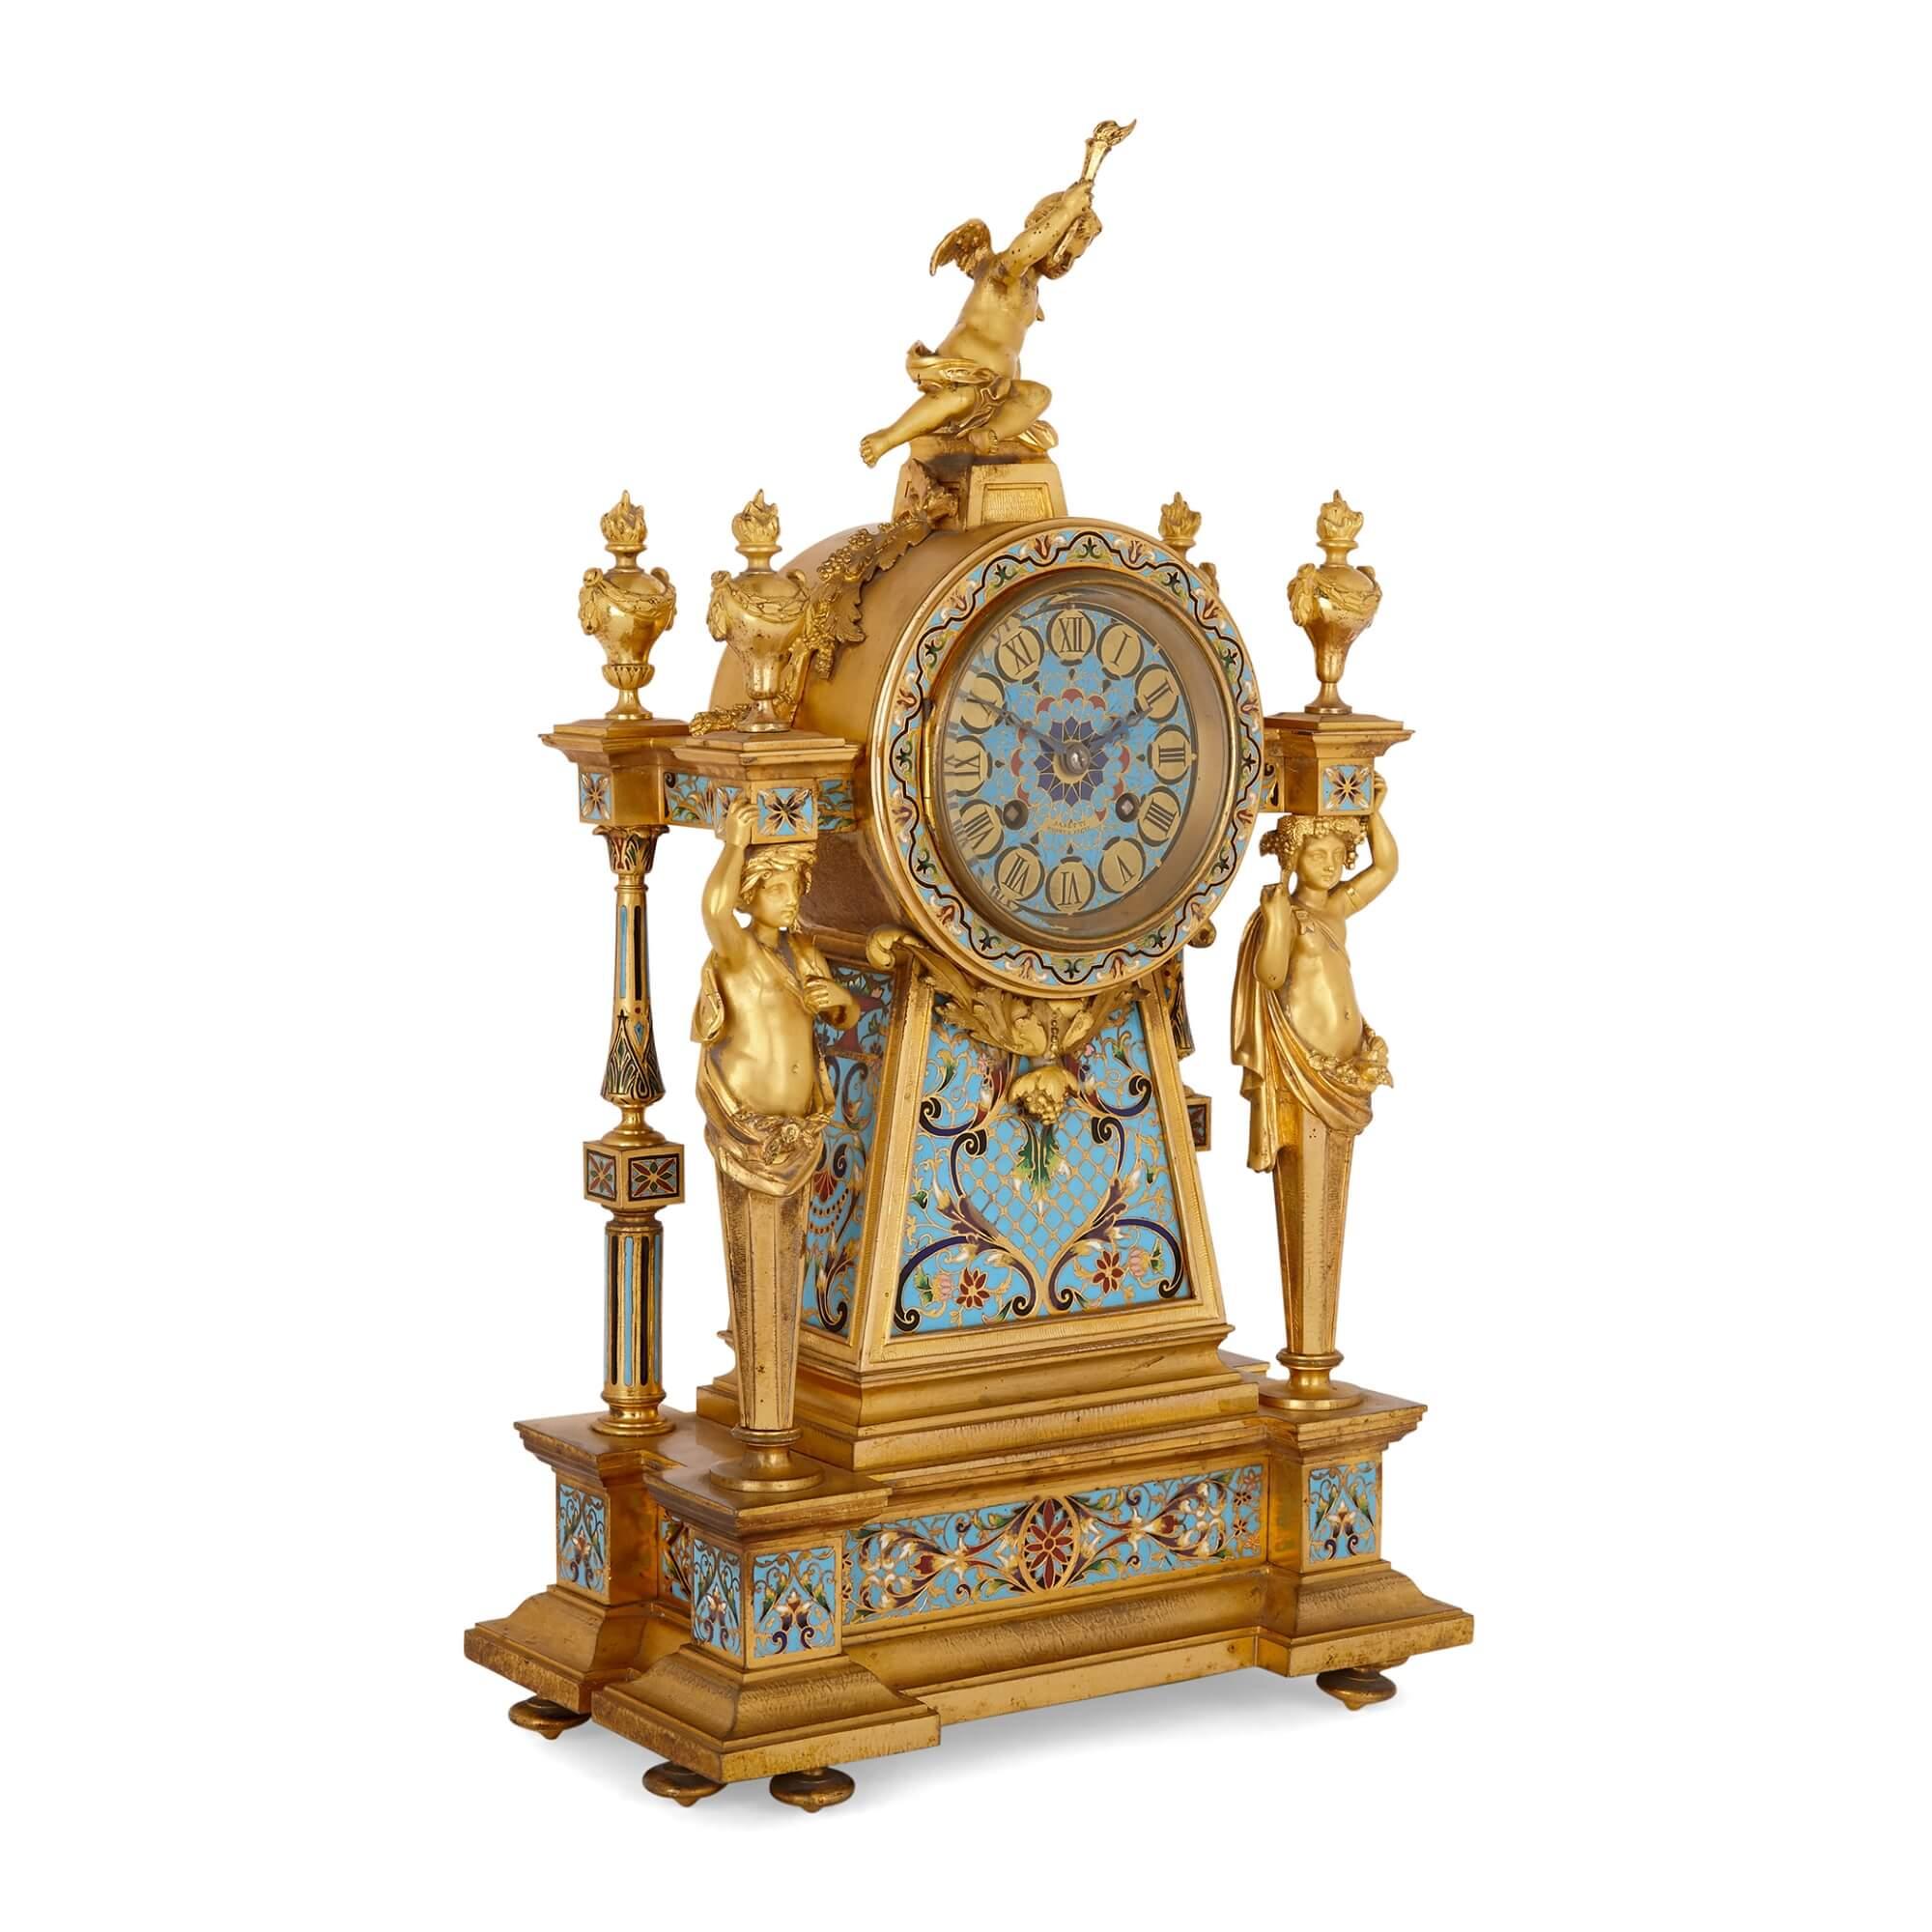 French gilt bronze and enamel three-piece clock set
French, late 19th Century
Clock: Height 45cm, width 26cm, depth 14.5cm
Candelabra: Height 31.5cm, width 21cm, depth 9cm

This charming clock set is a beautiful piece of late nineteenth-century